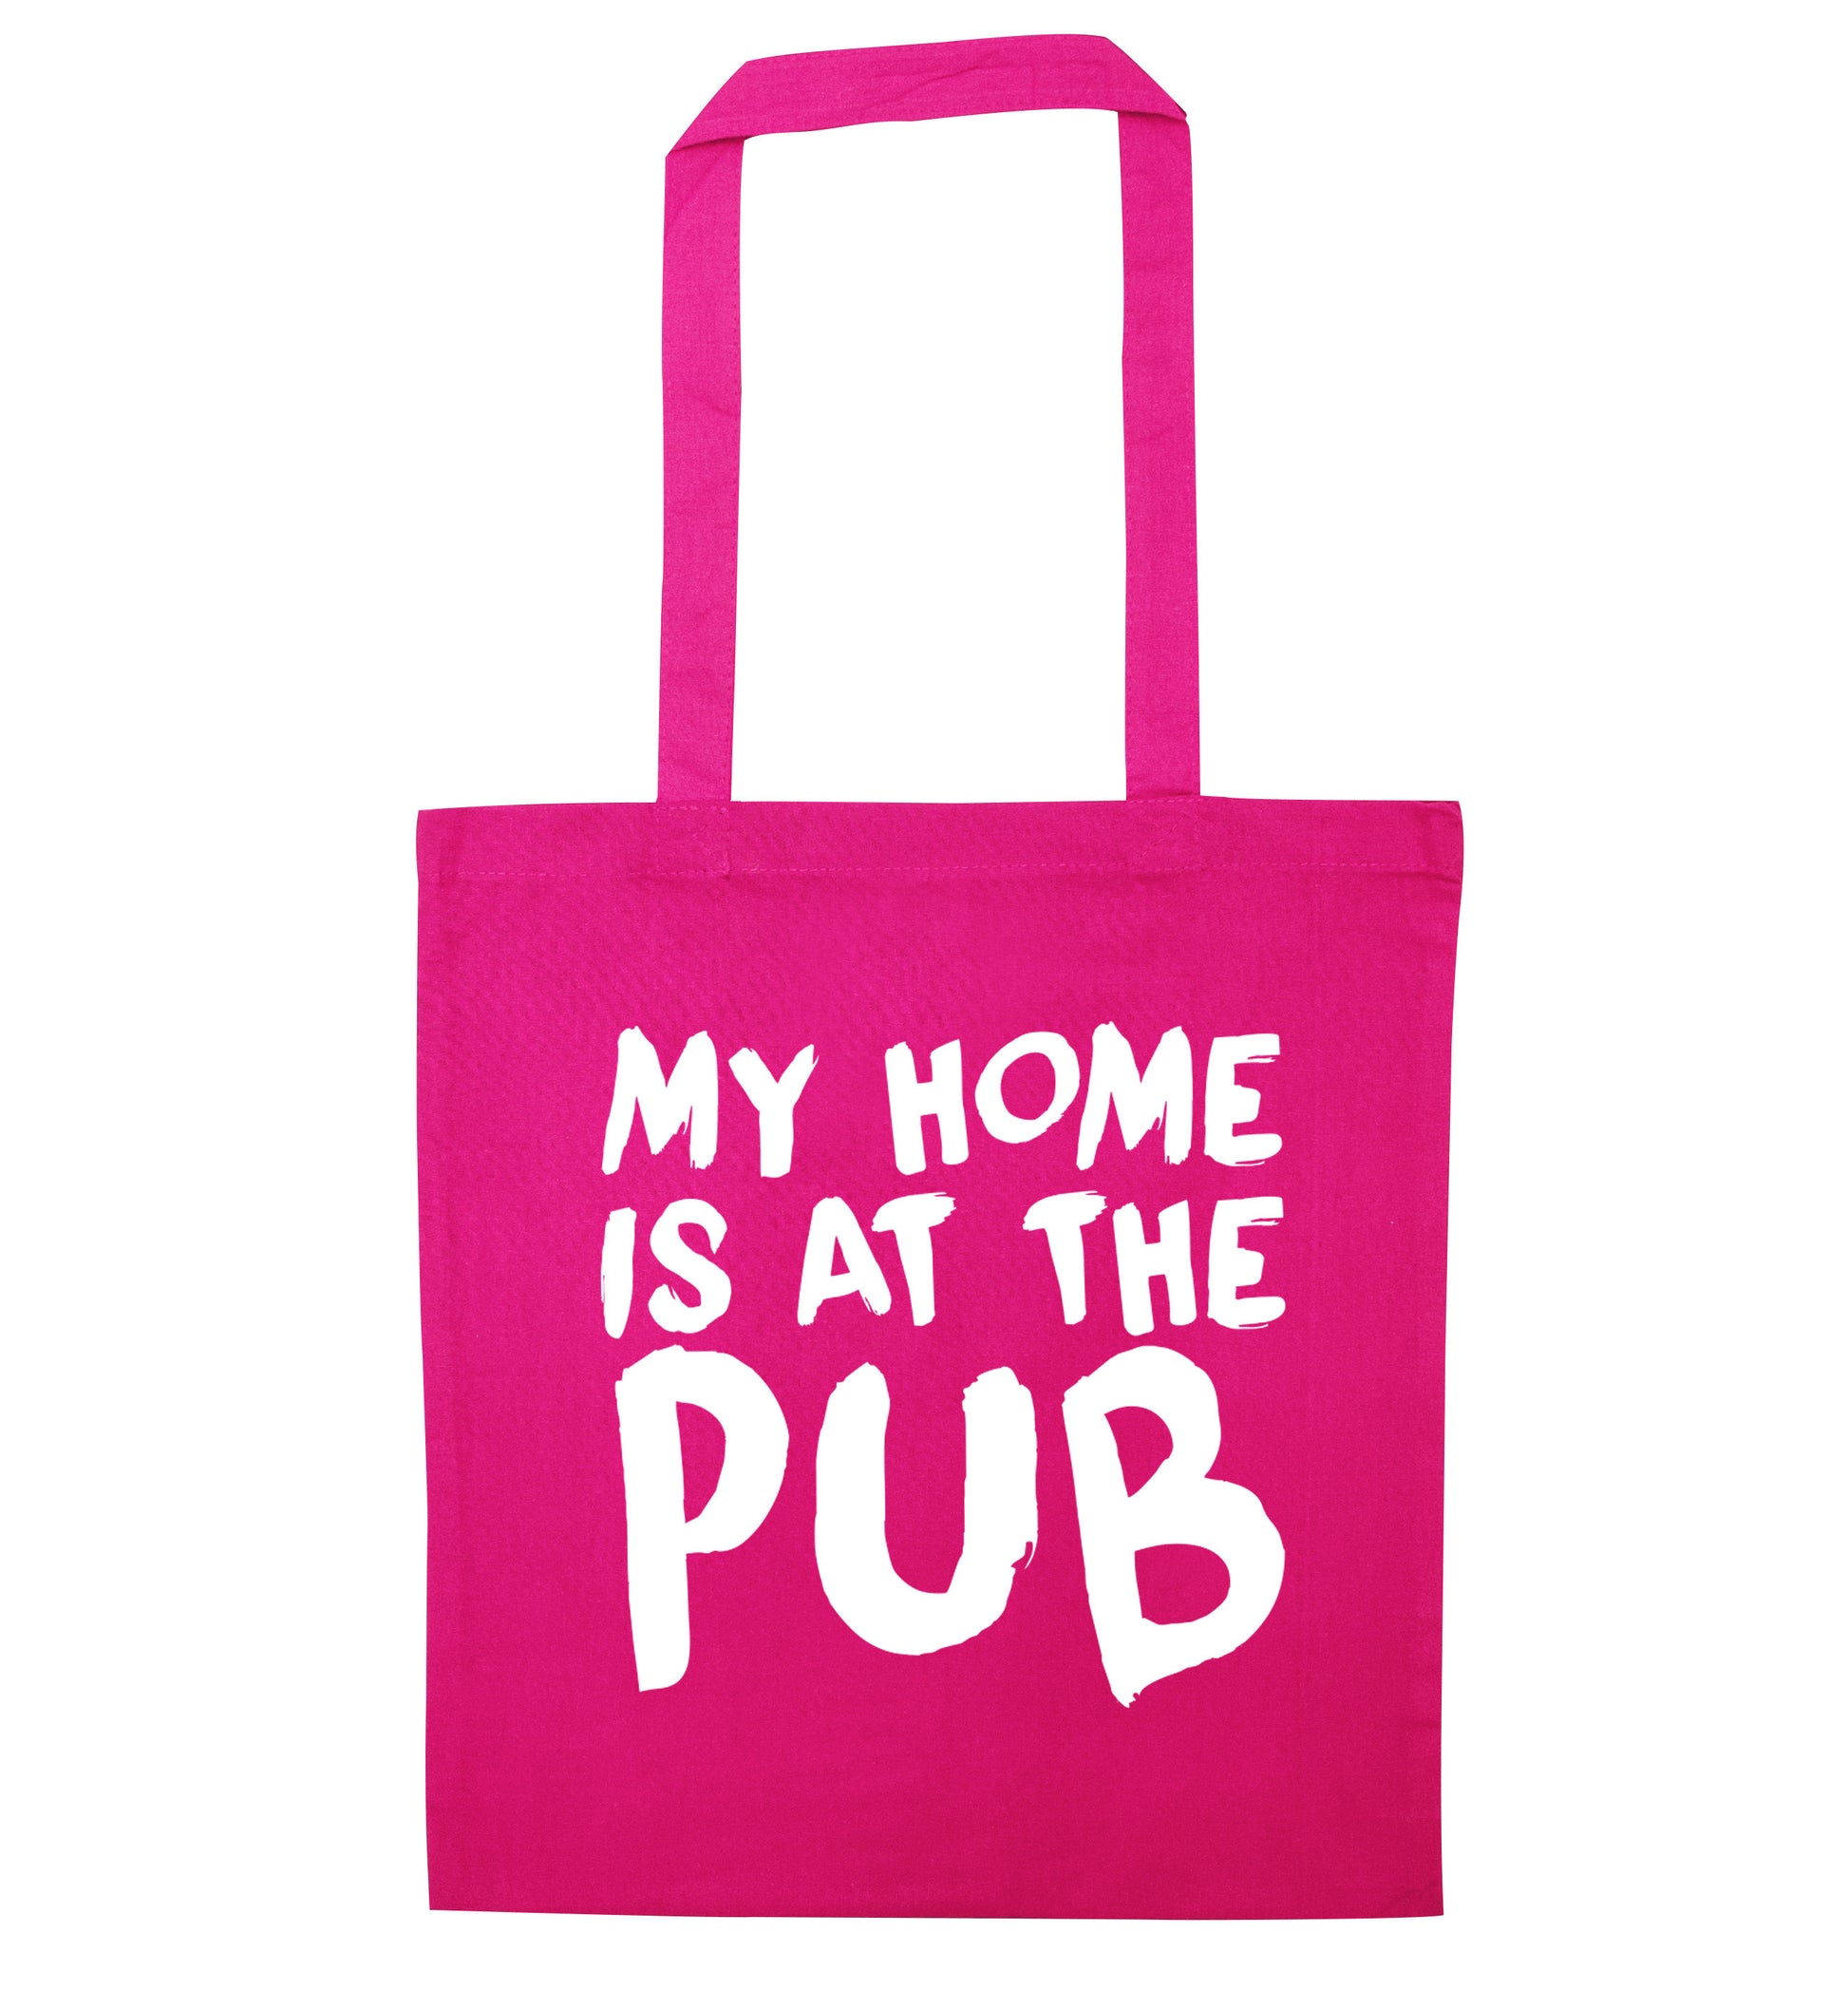 My home is at the pub pink tote bag